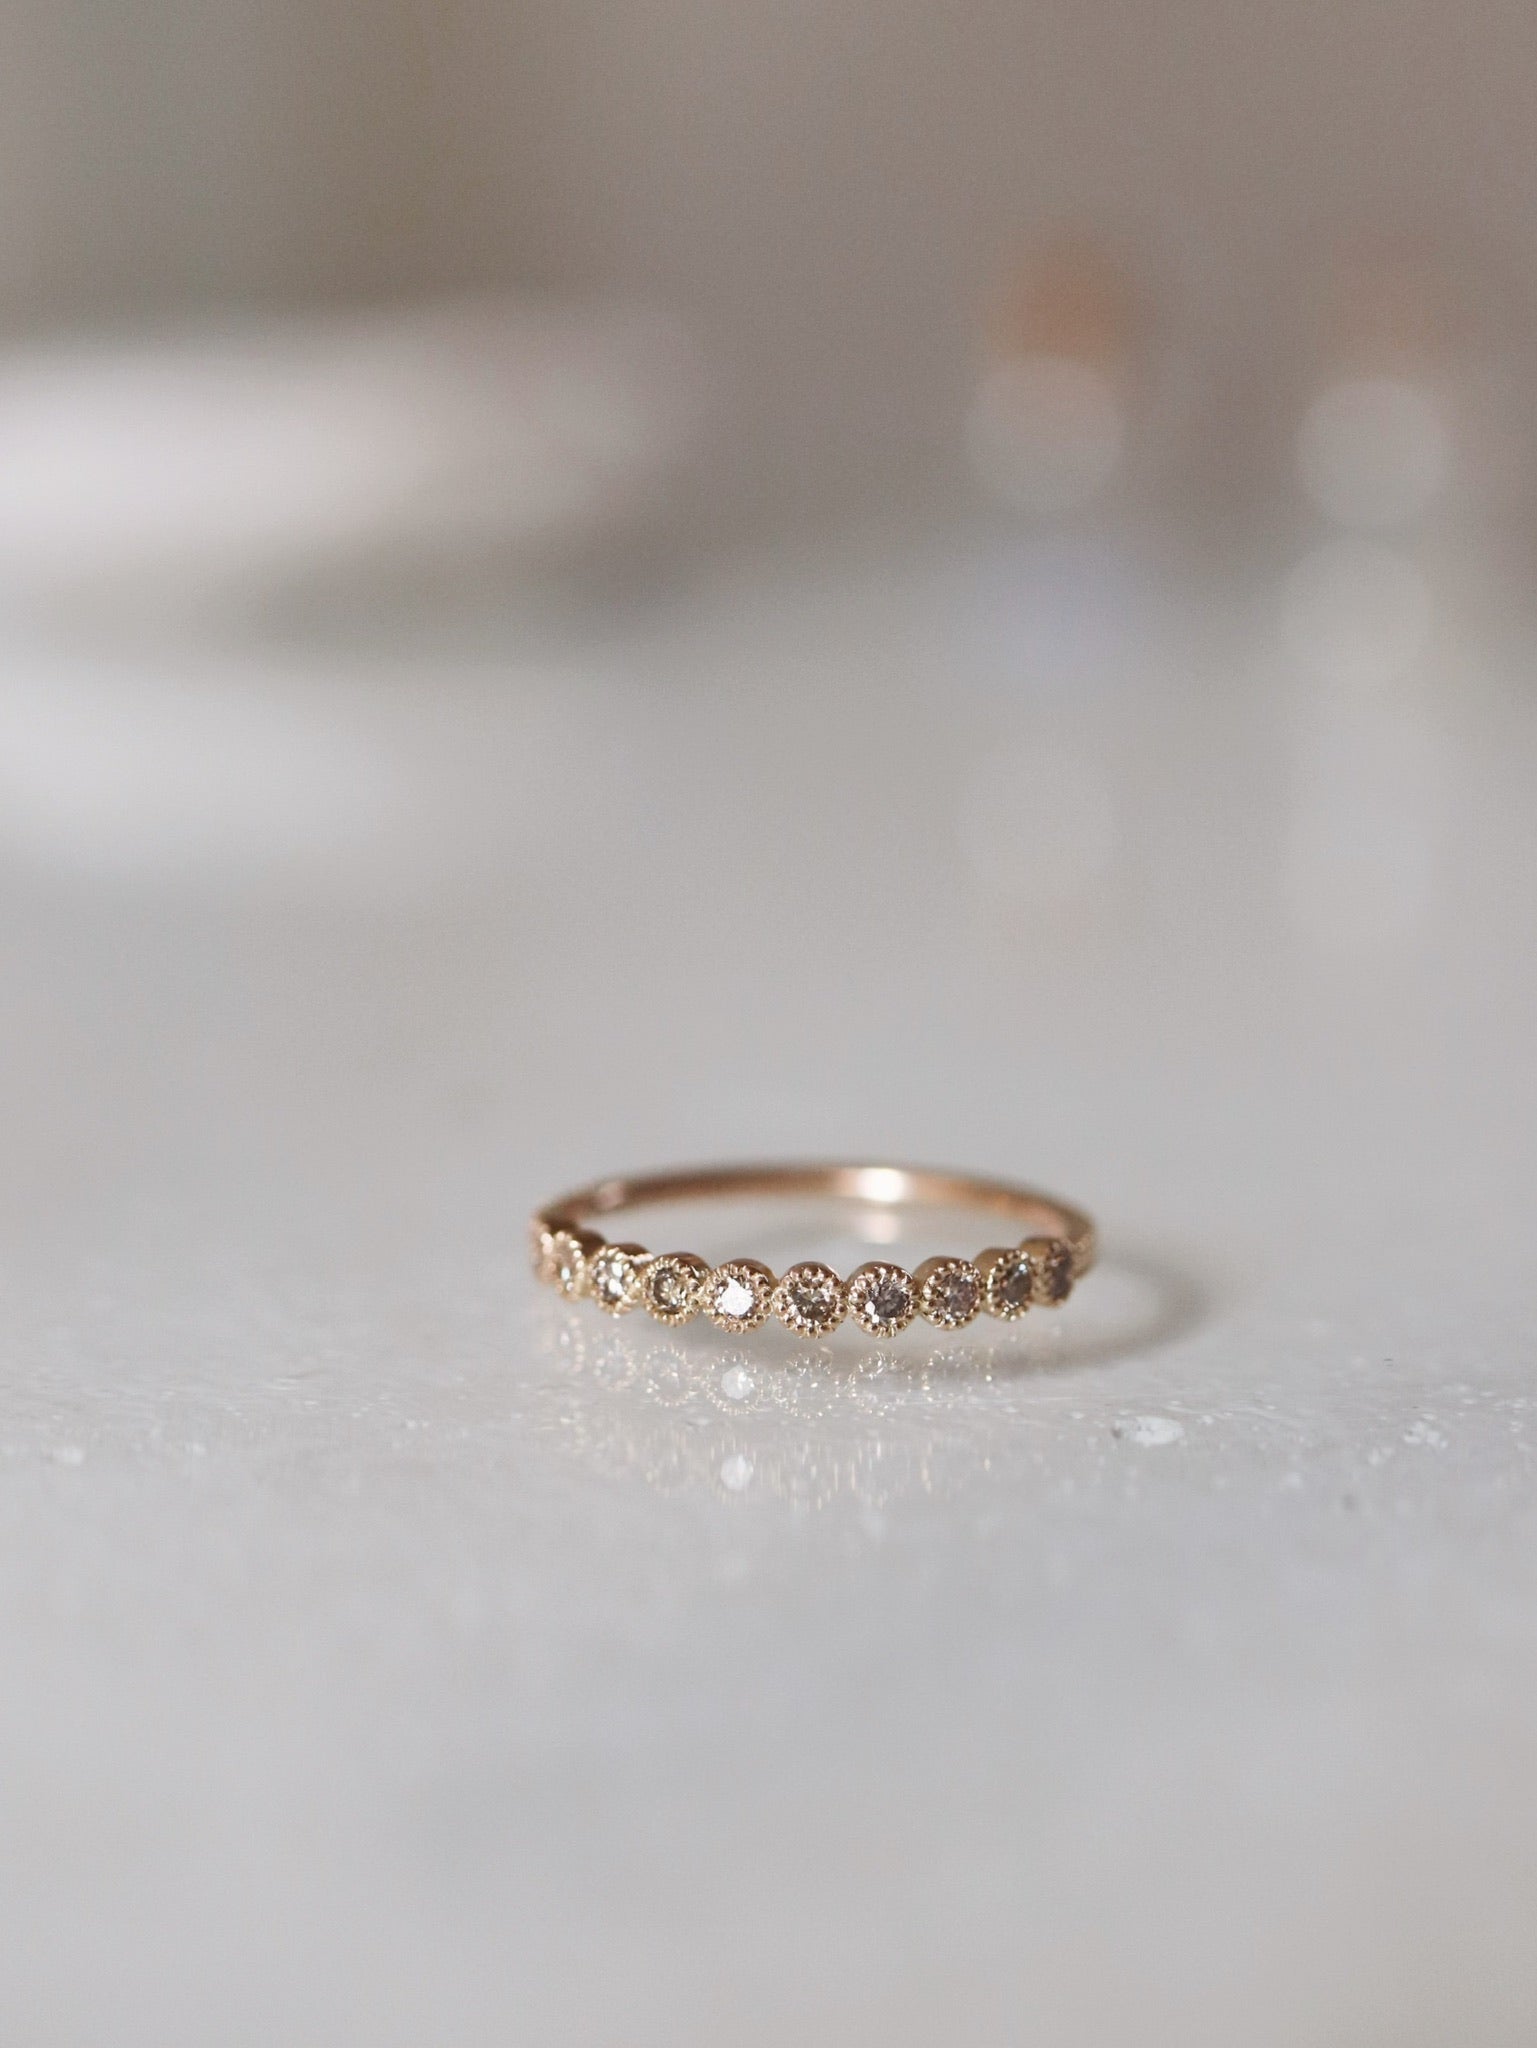 Vintage Style Eternity Bands